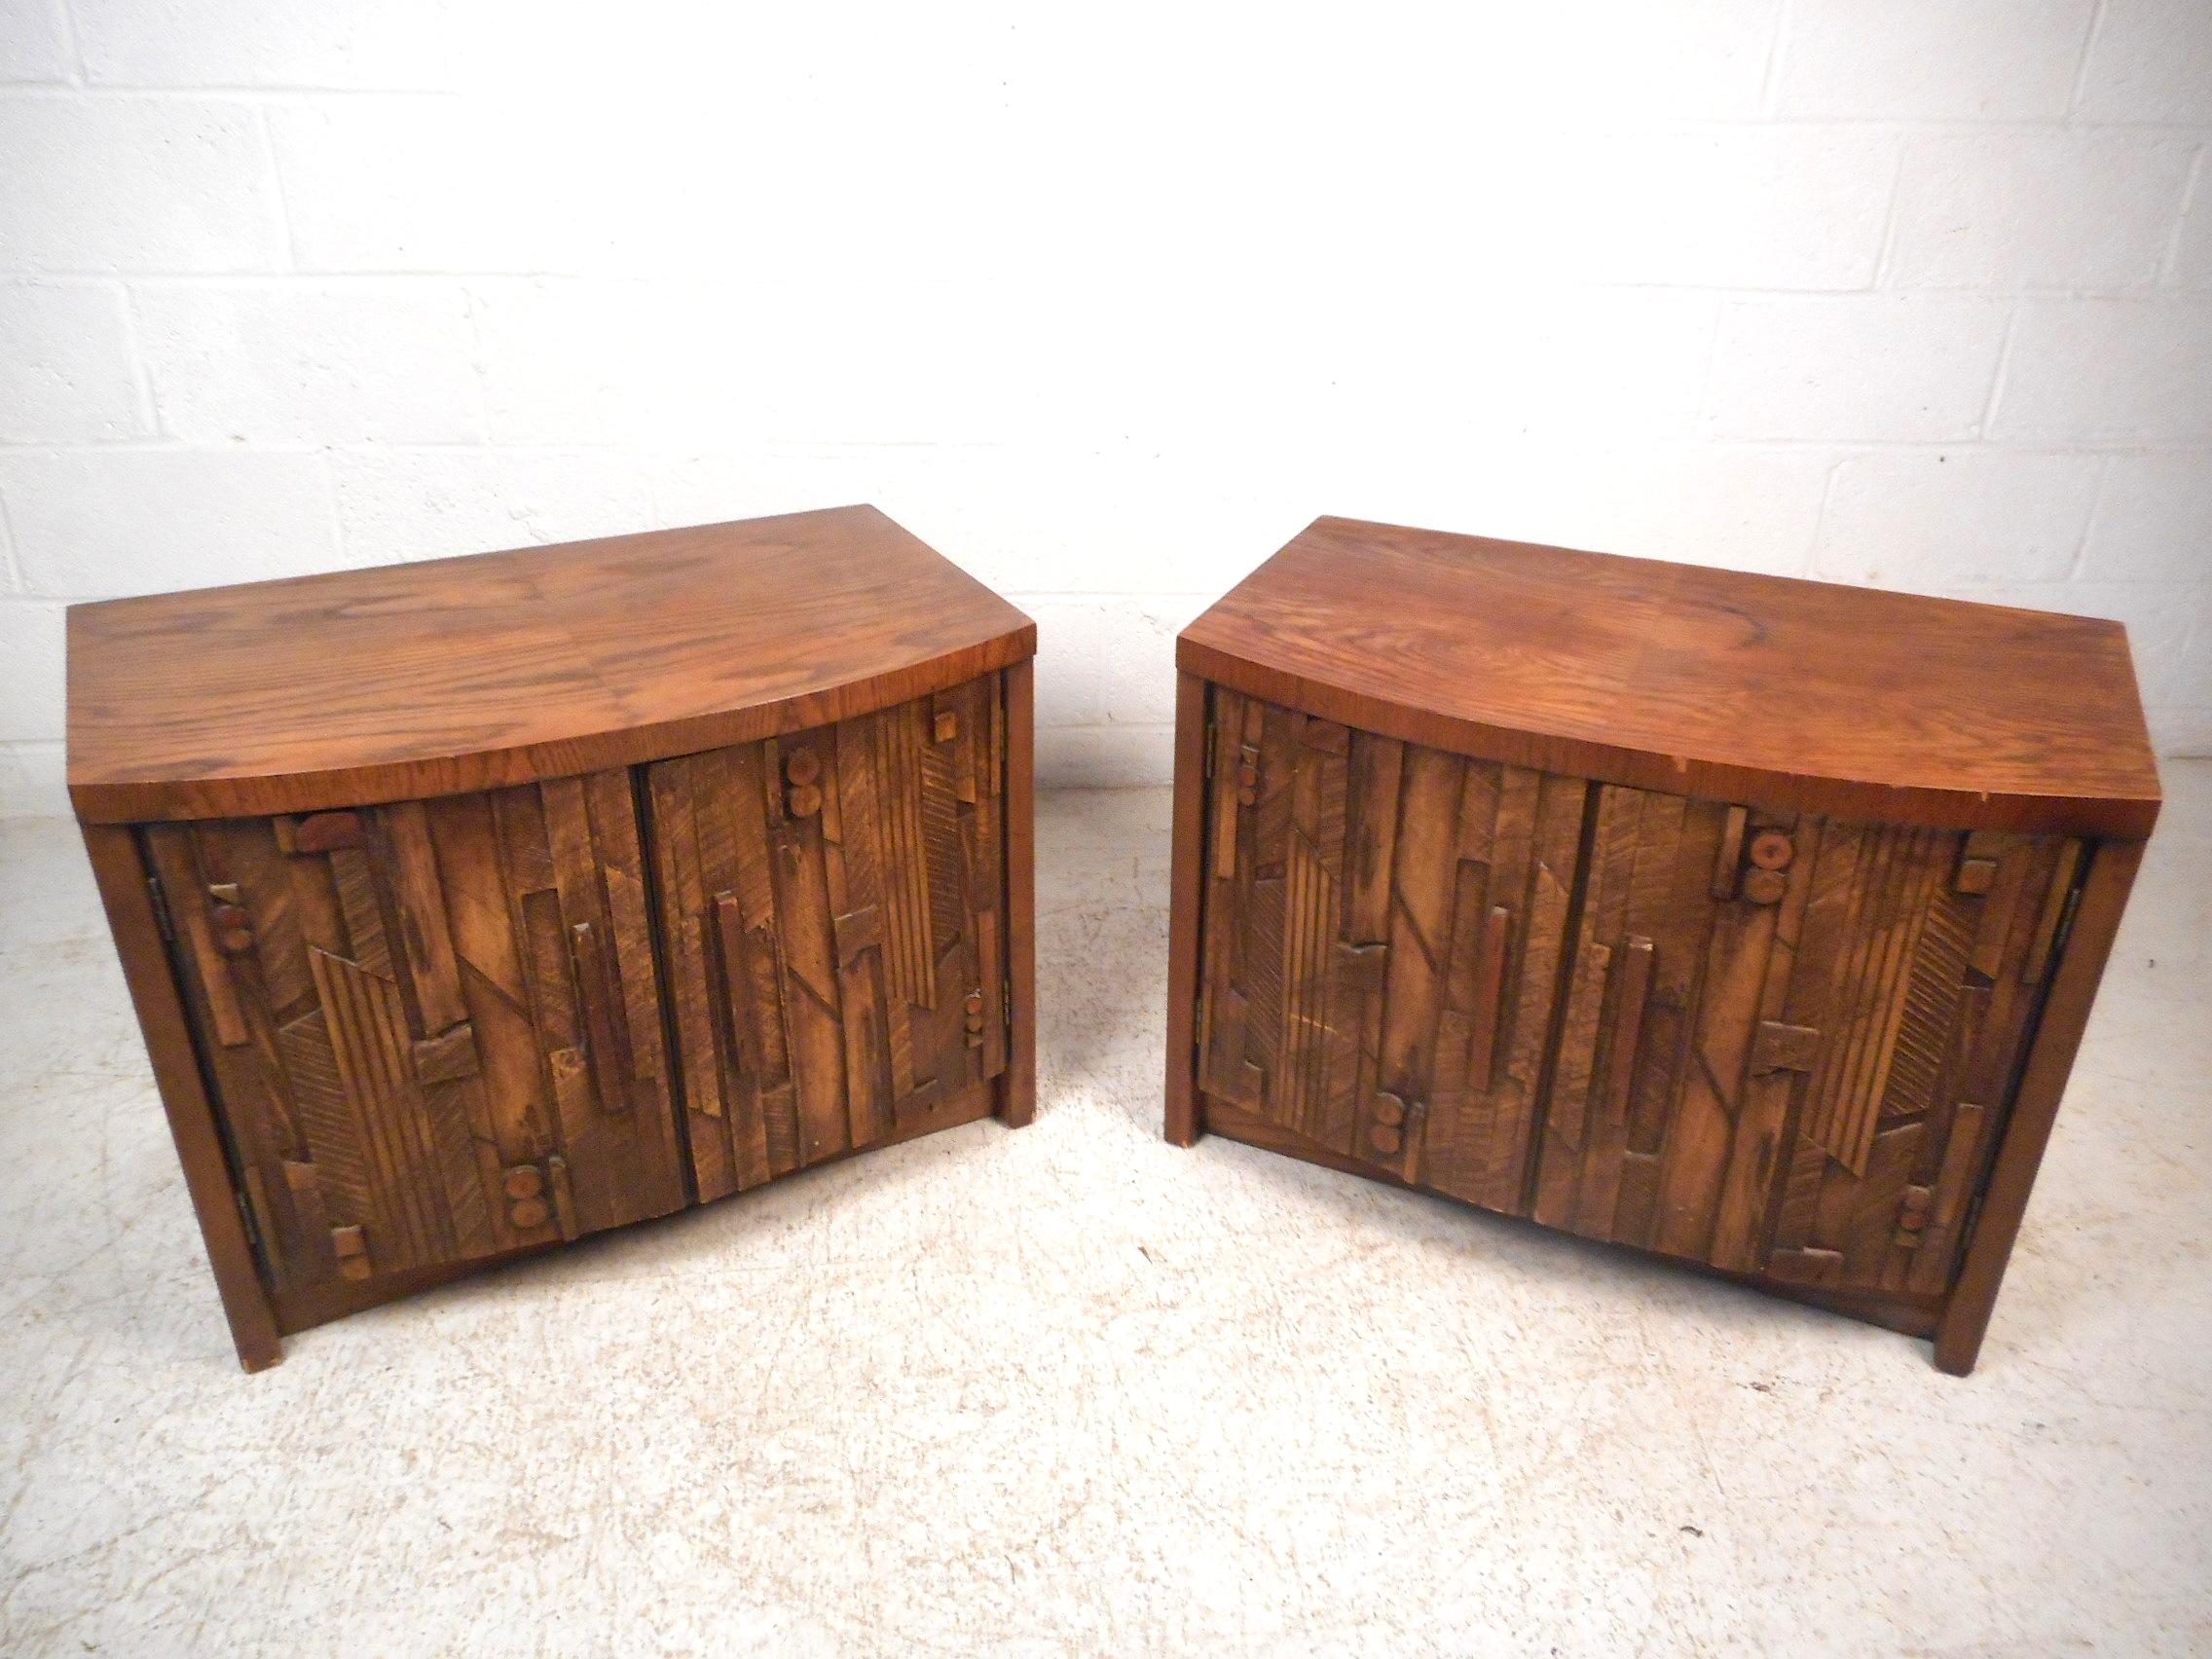 Stylish pair of mid-century nightstands / end tables with a brutalist-style decorative cabinet doors. Intricately designed and sturdy, these nightstands are sure to please when situated in any modern interior. Please confirm item location with